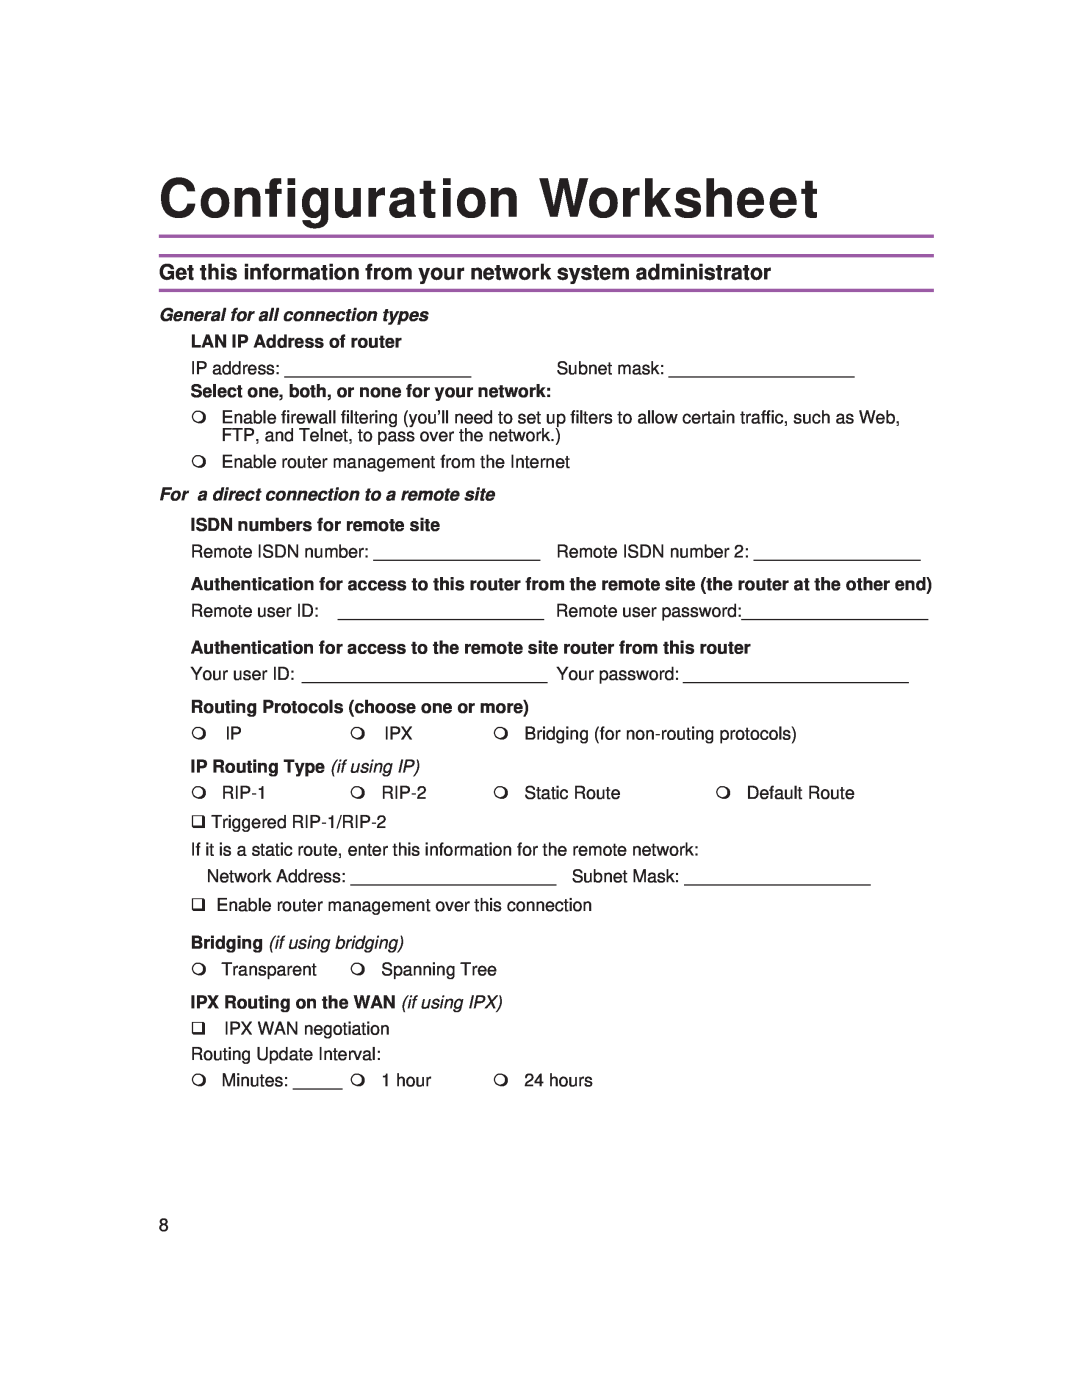 Intel 9545 quick start Configuration Worksheet, General for all connection types, LAN IP Address of router, Subnet mask 